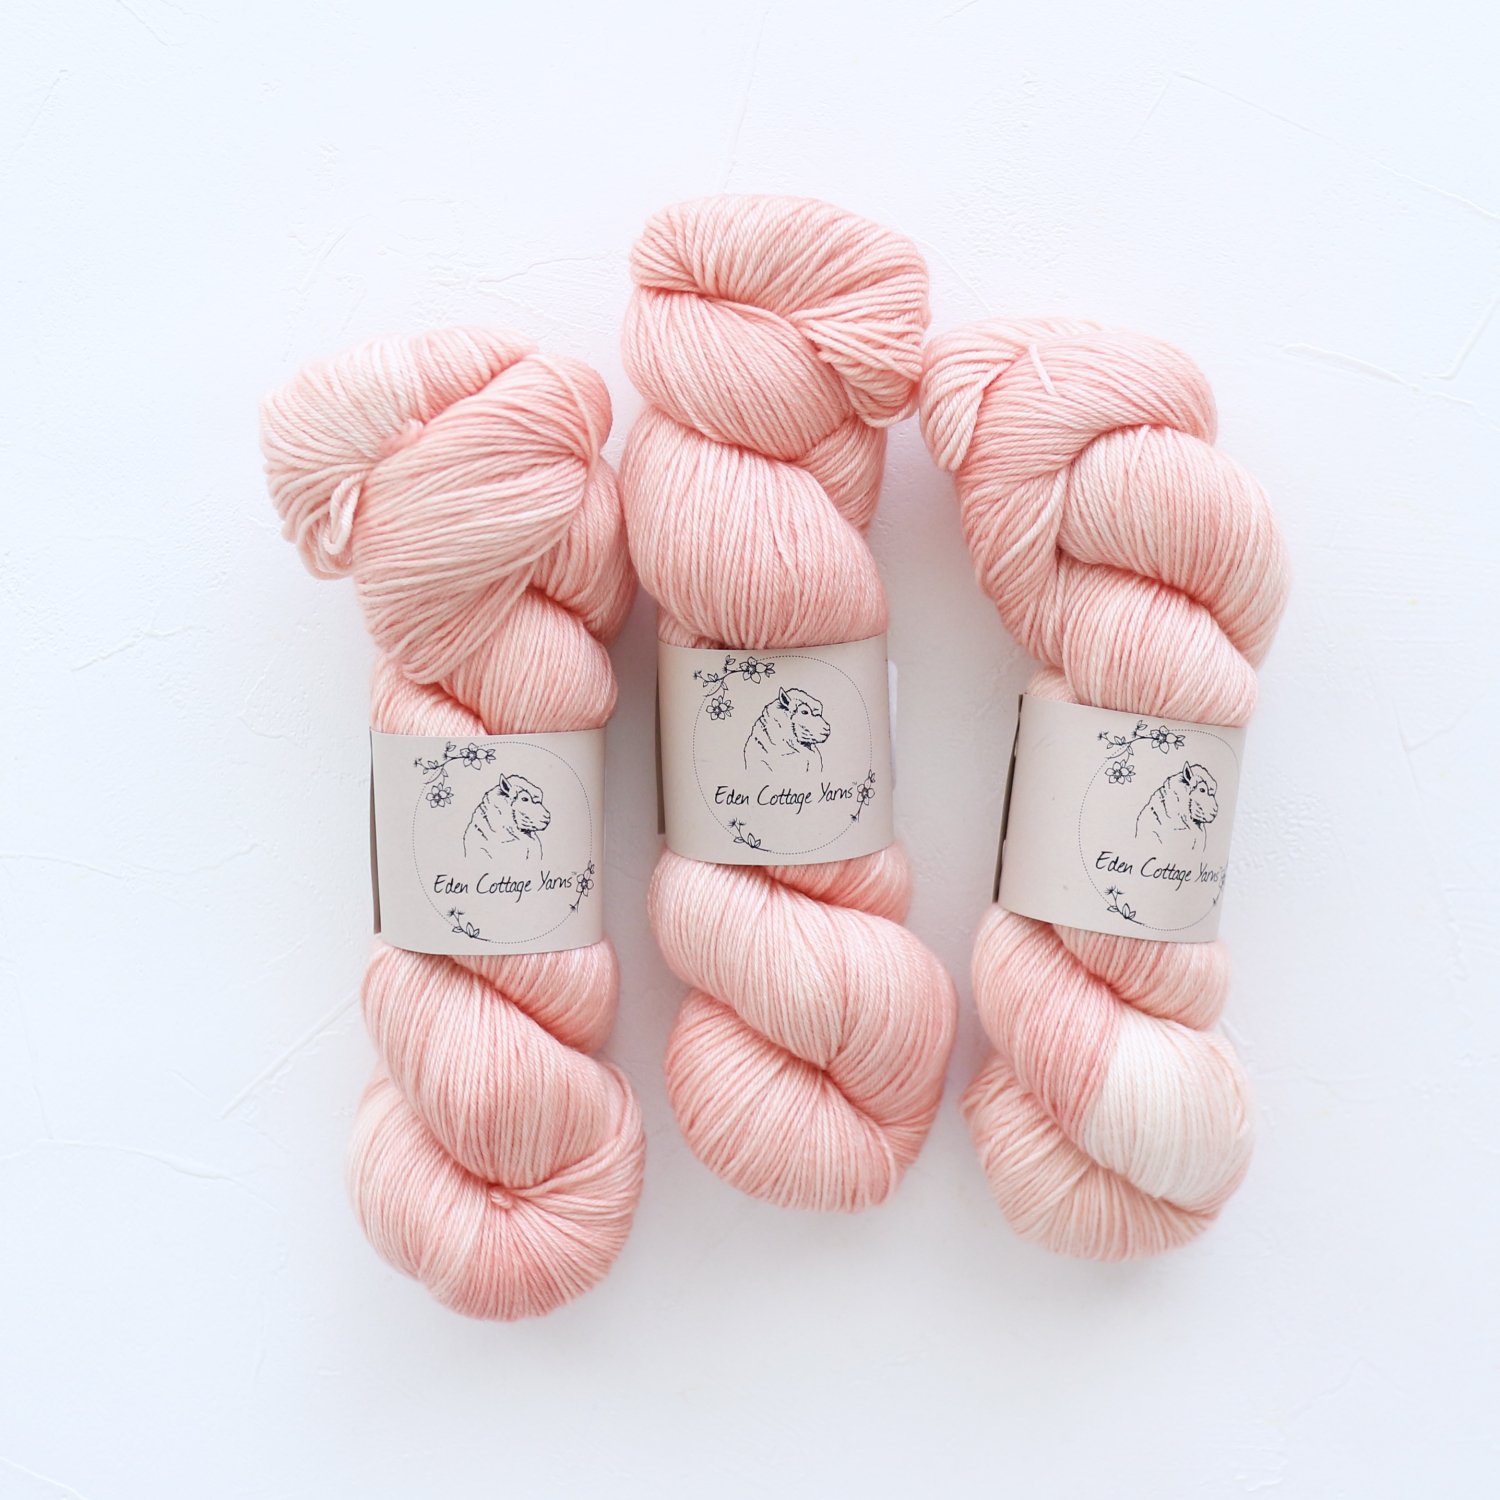 Eden Cottage Yarns<br>Pendle 4ply<br>Apricot Tulip